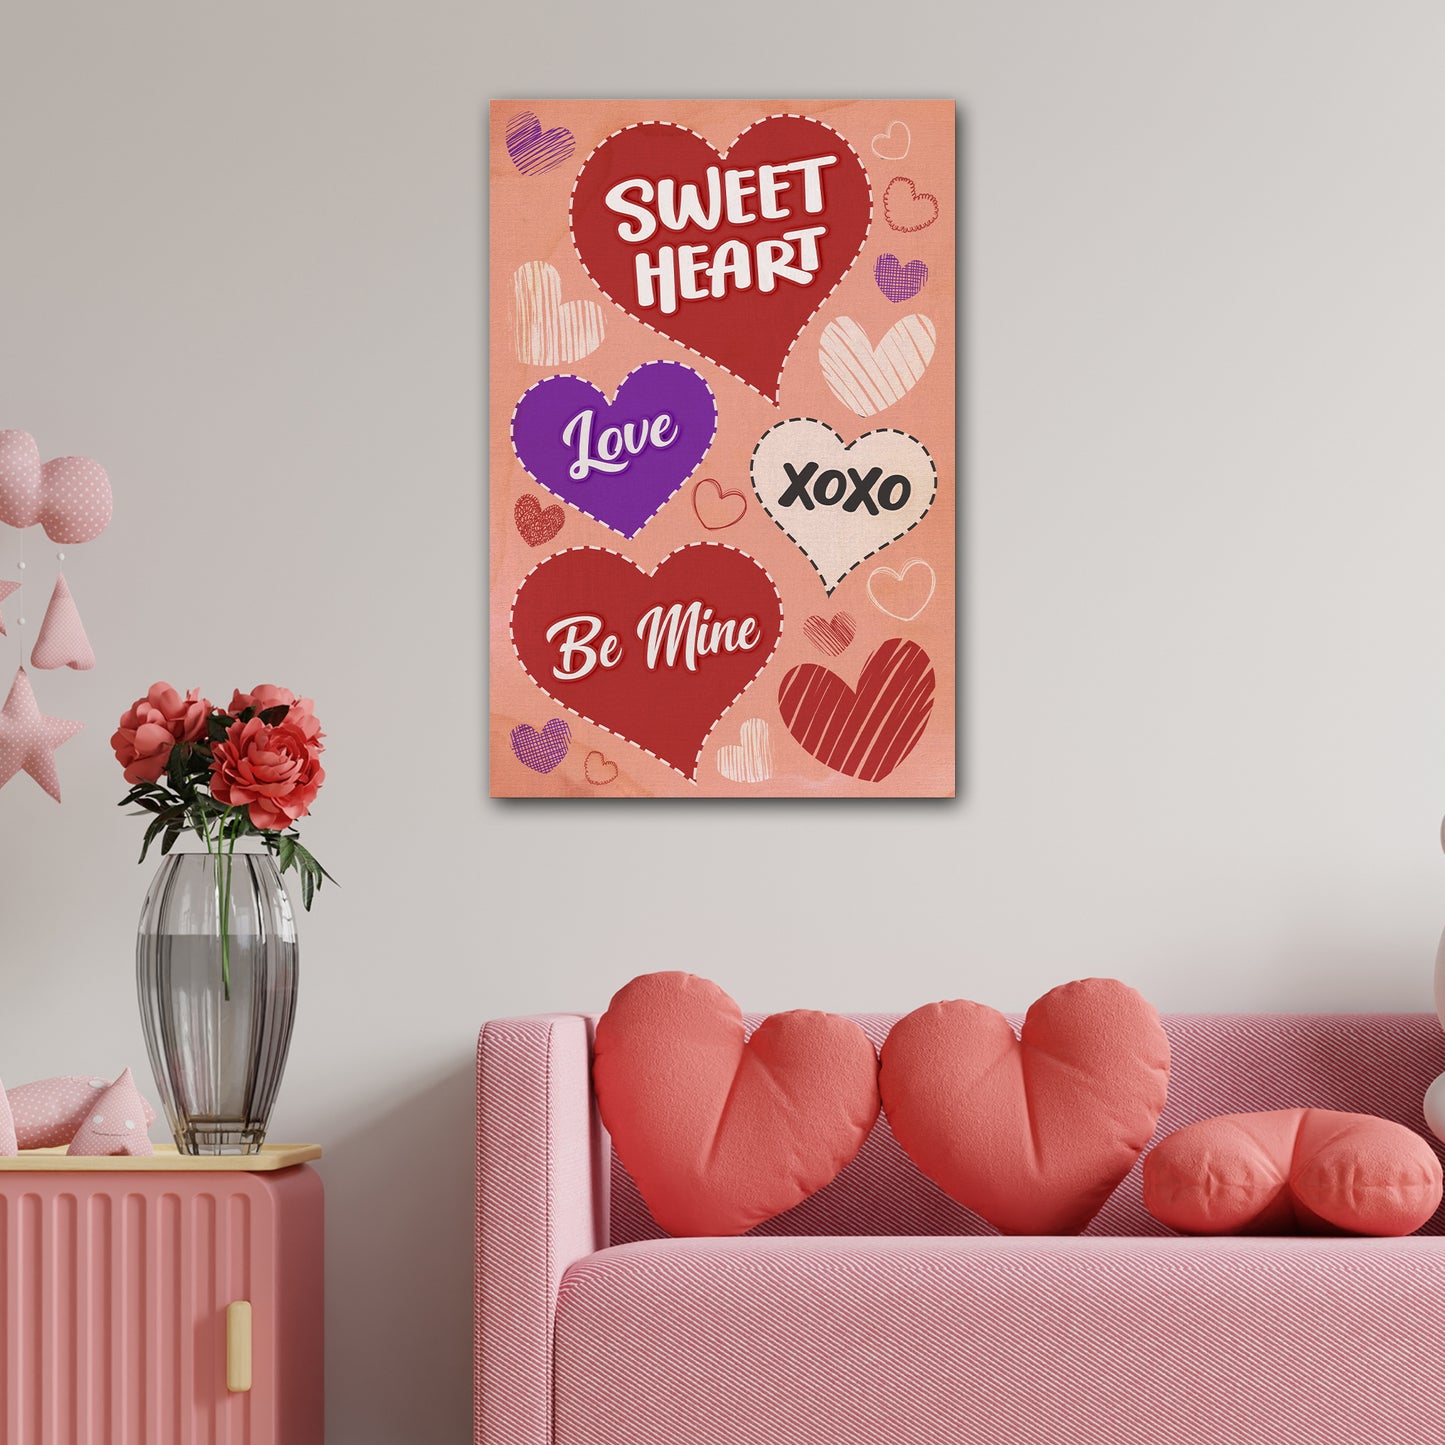 Vintage Stripes Love Hearts Valentine's Day Sign - Image by Tailored Canvases